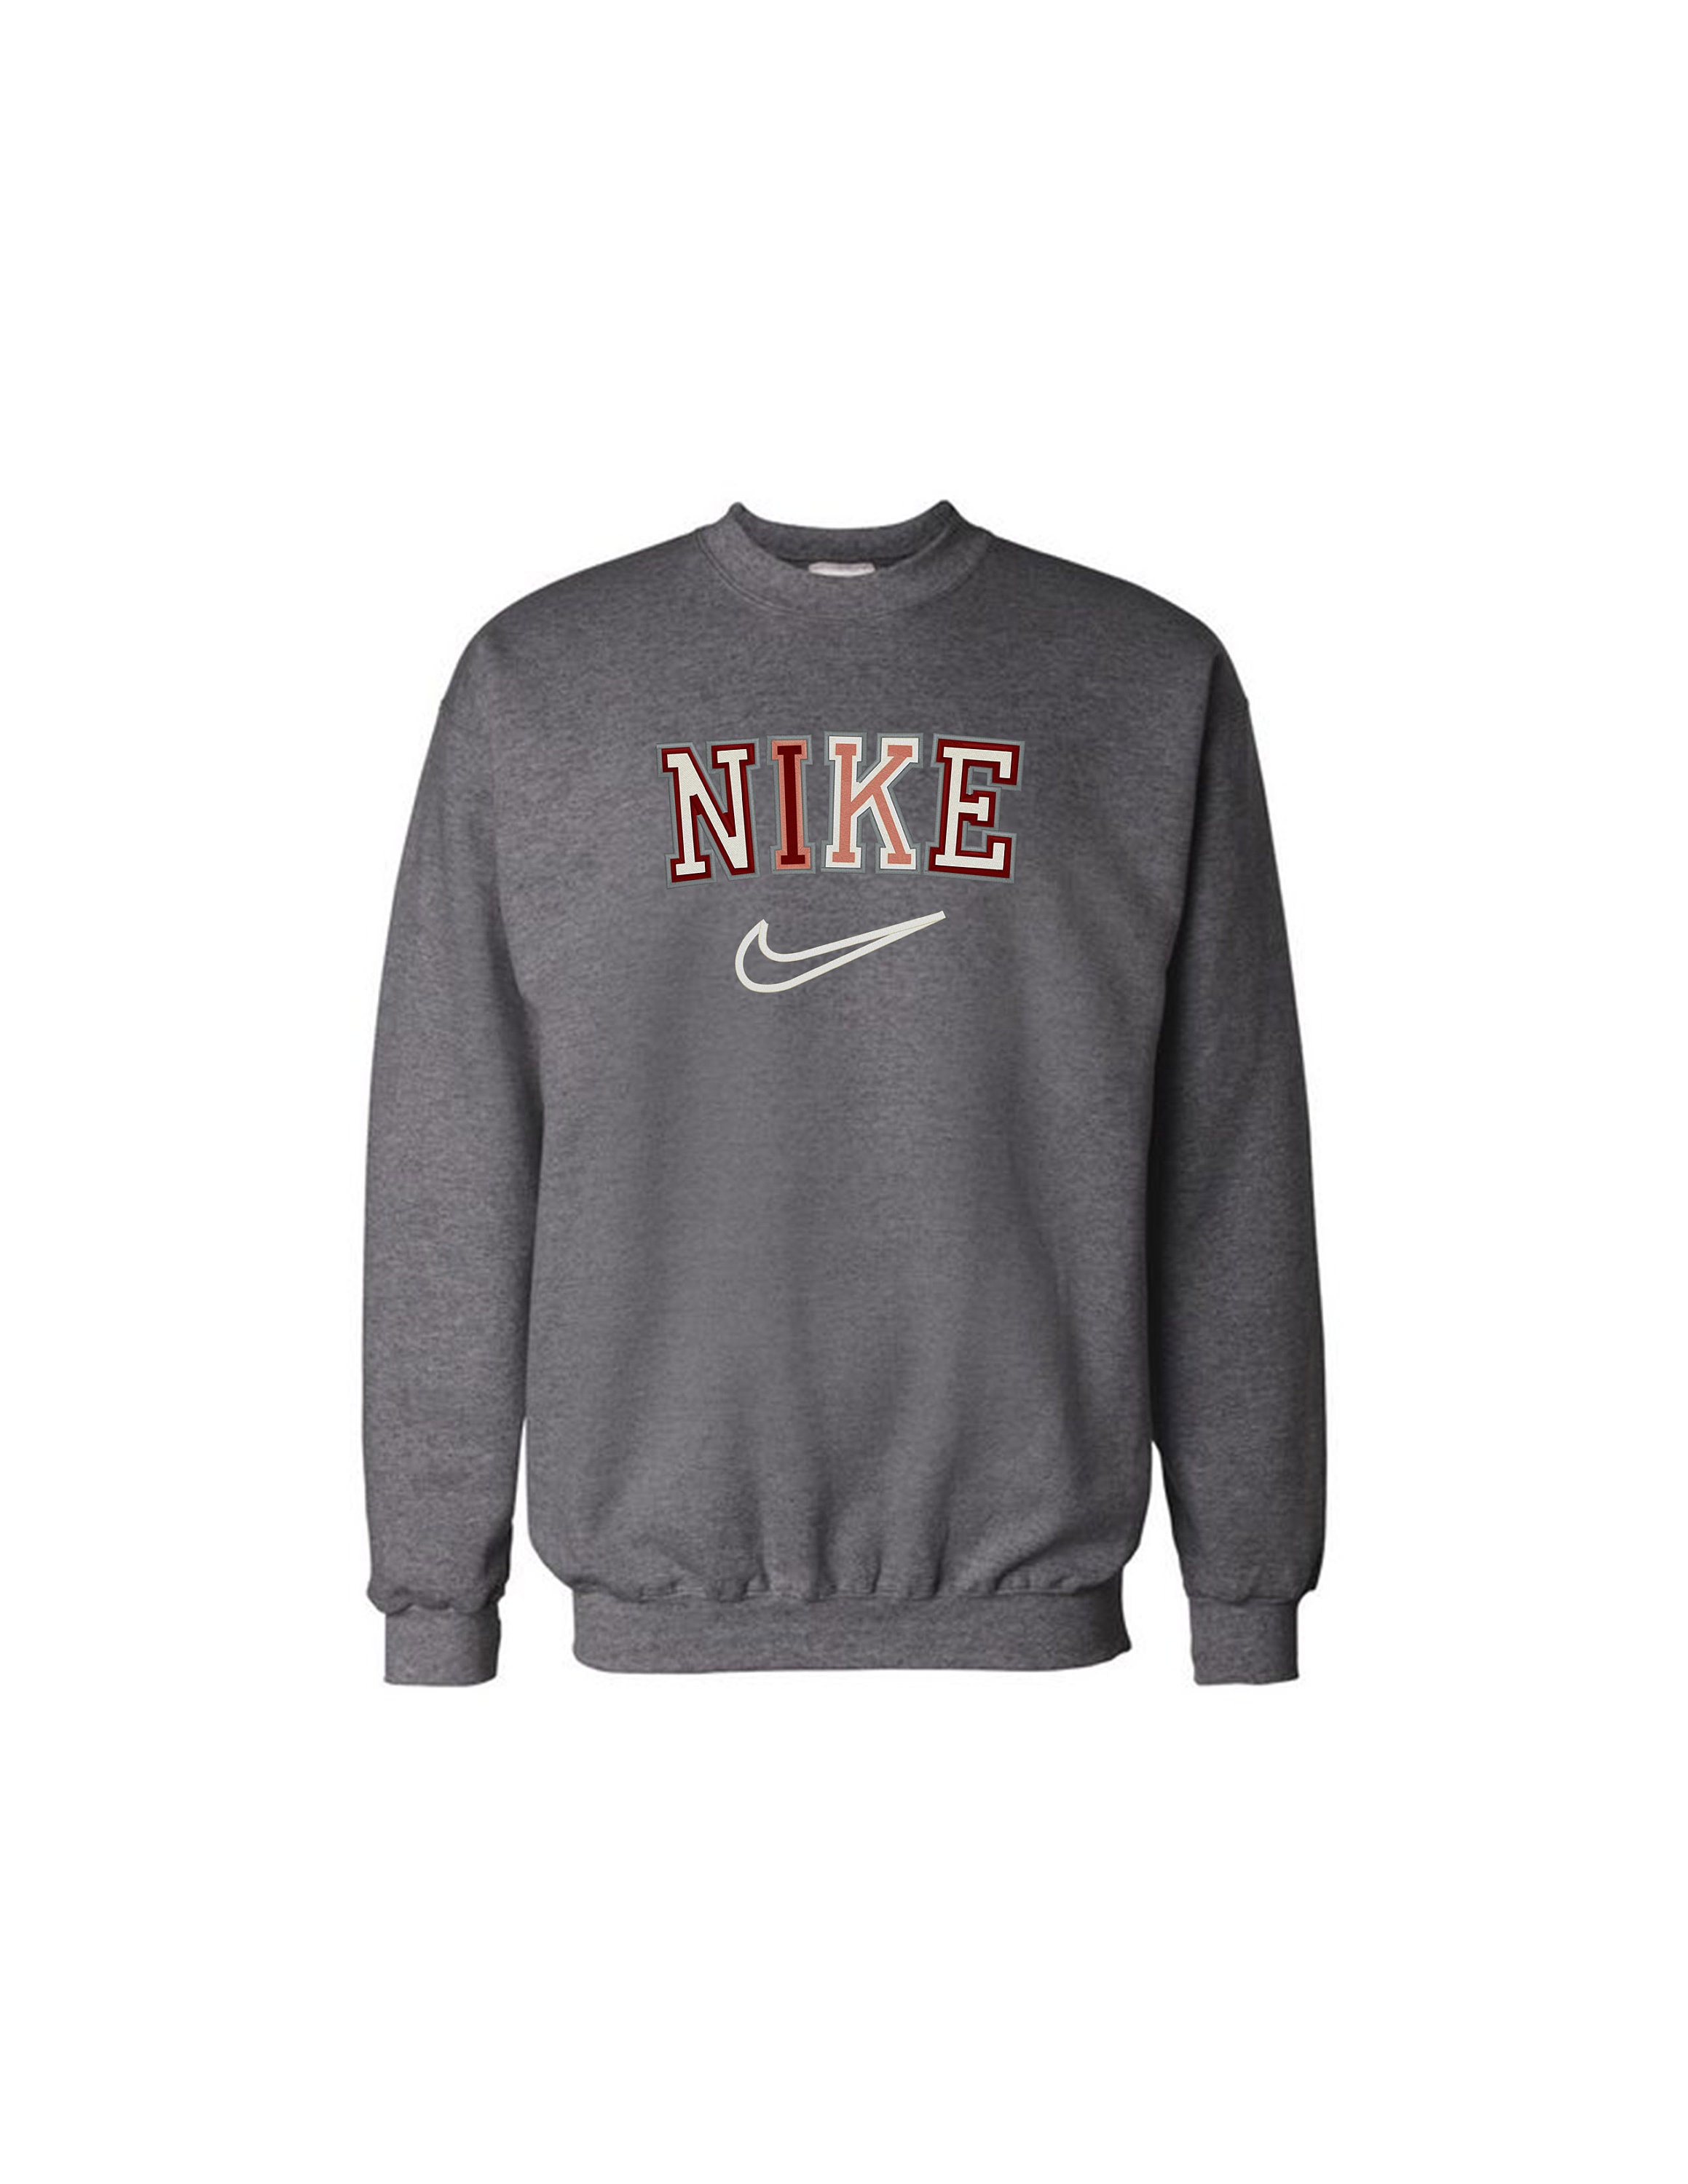 Nike Spell Out Embroidered Sweatshirt with Fall Colors | Etsy